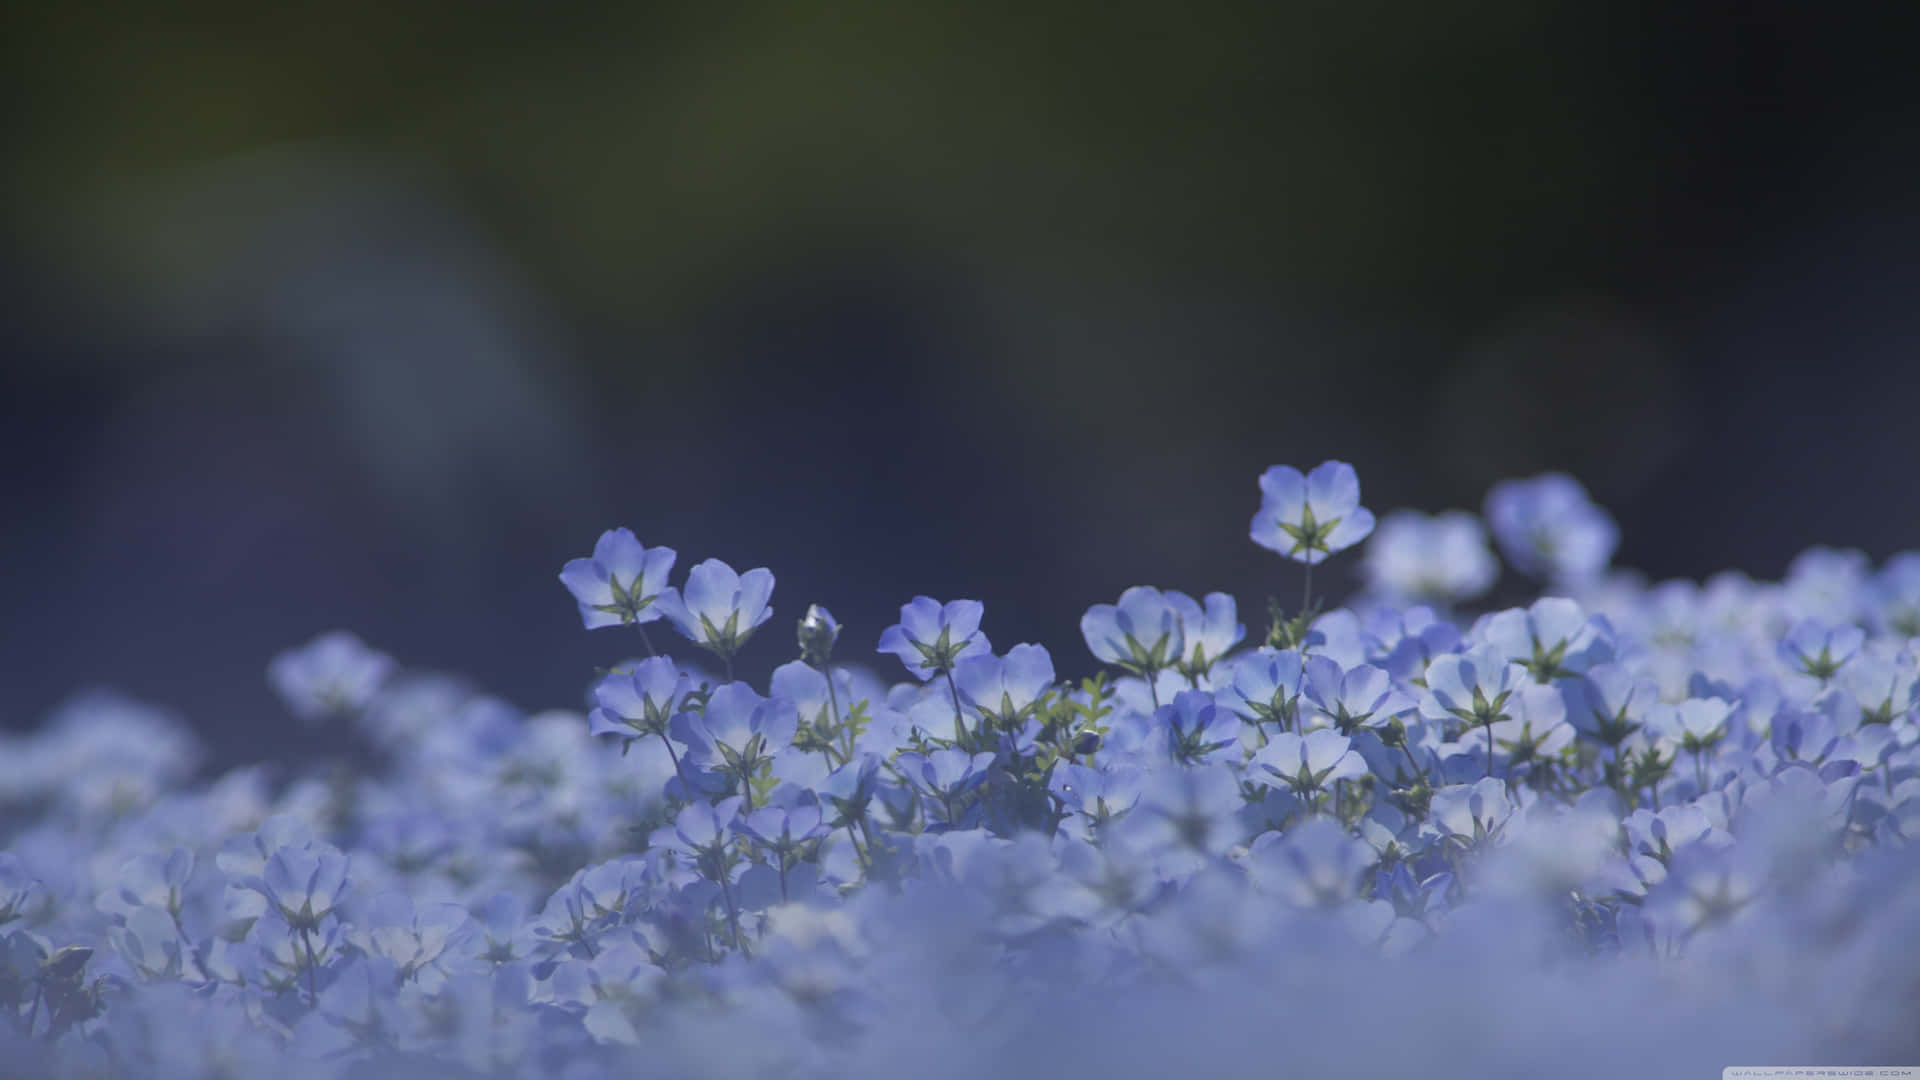 Blue Flowers In The Field With A Blurry Background